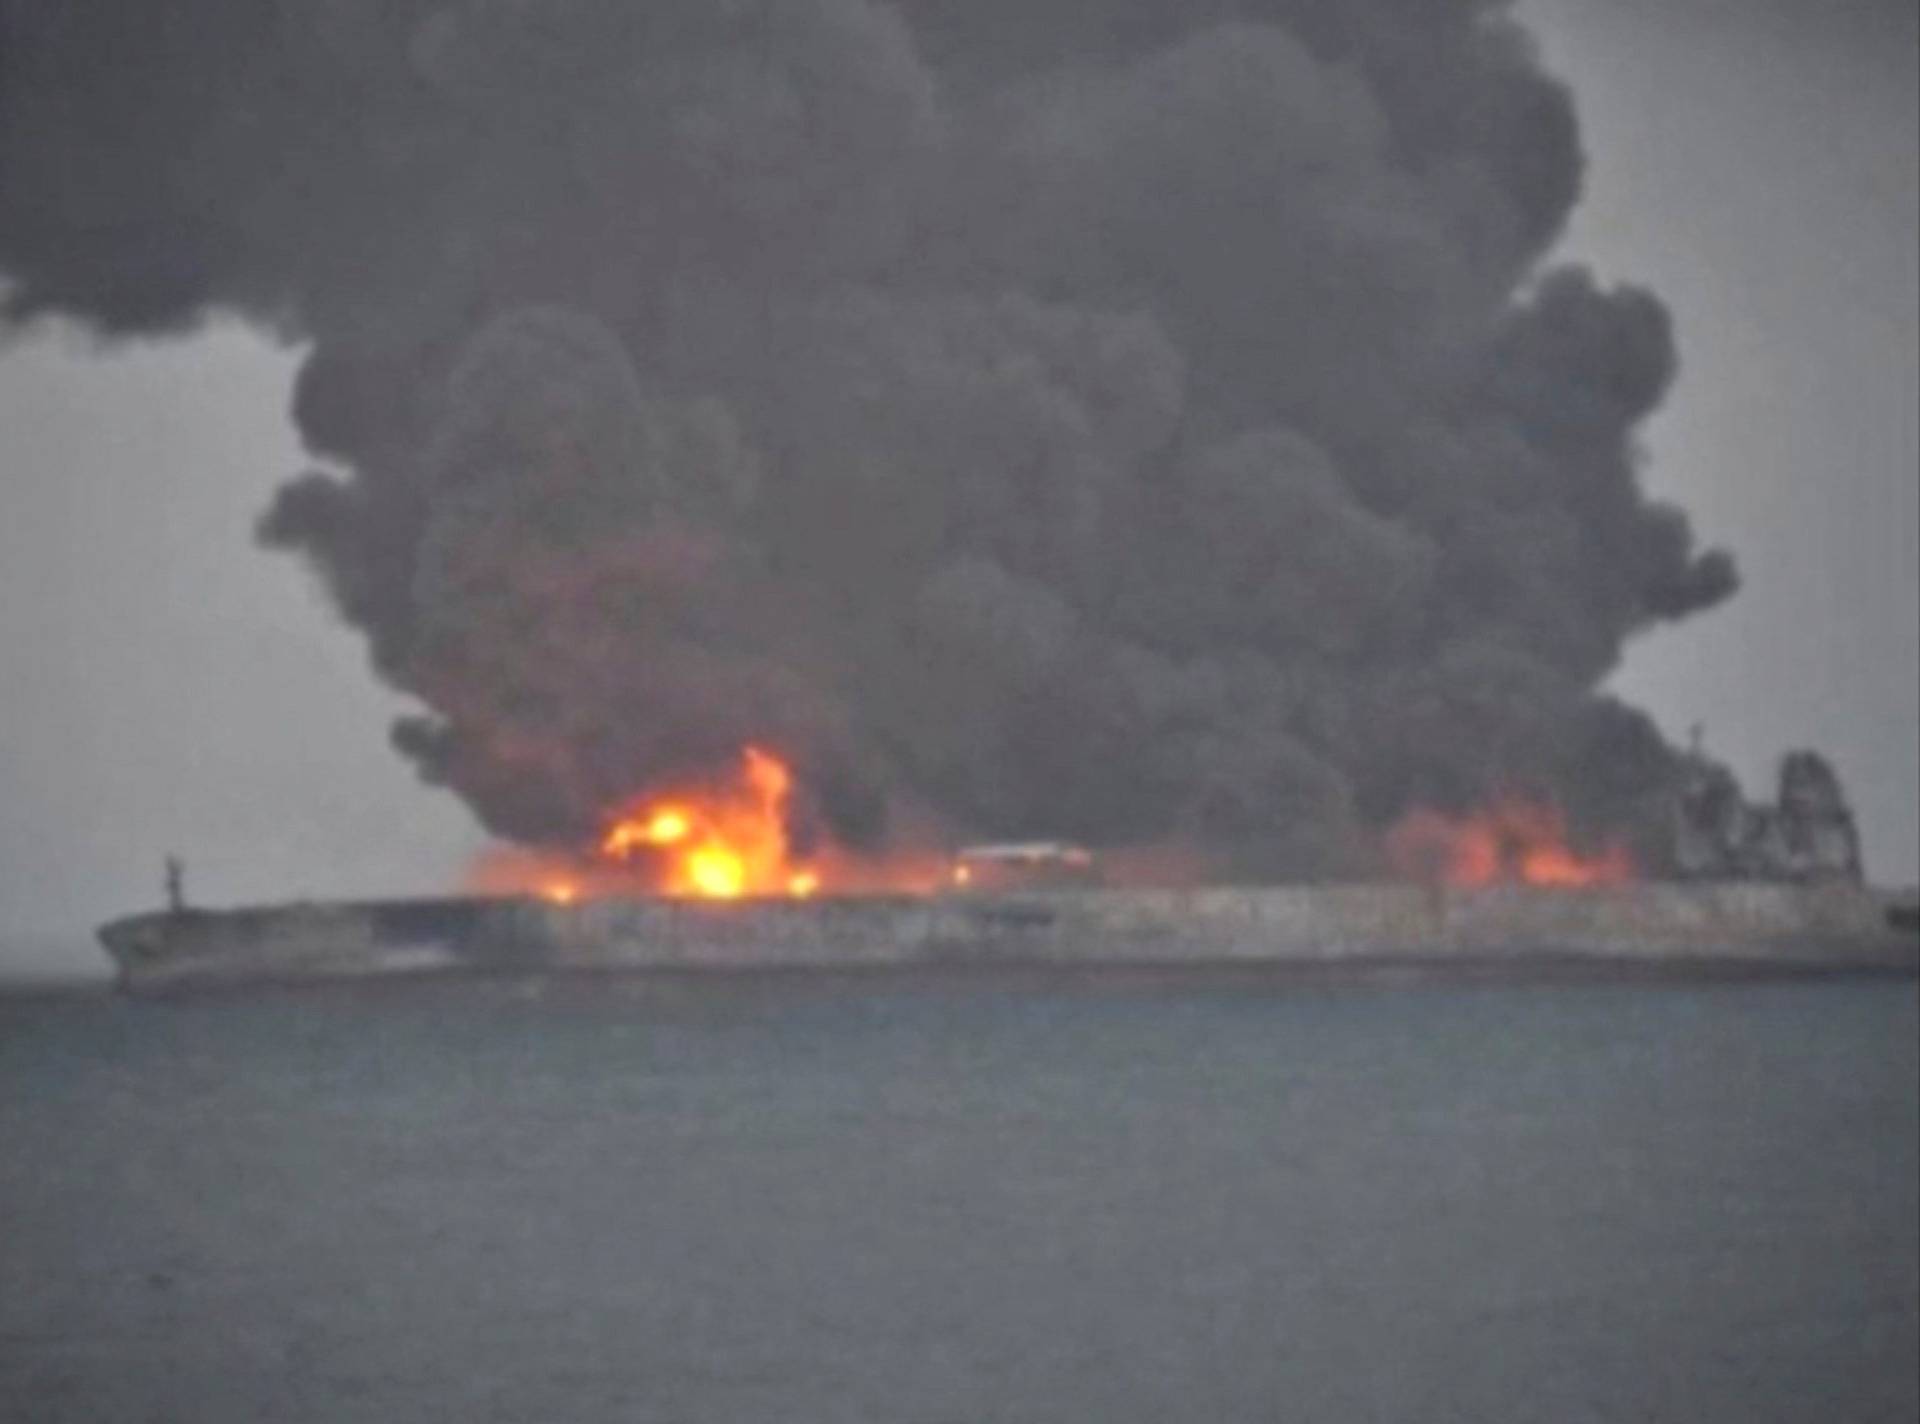 Smoke and fire is seen from Panama-registered tanker Sanchi carrying Iranian oil after it collided with a Chinese freight ship in the East China Sea